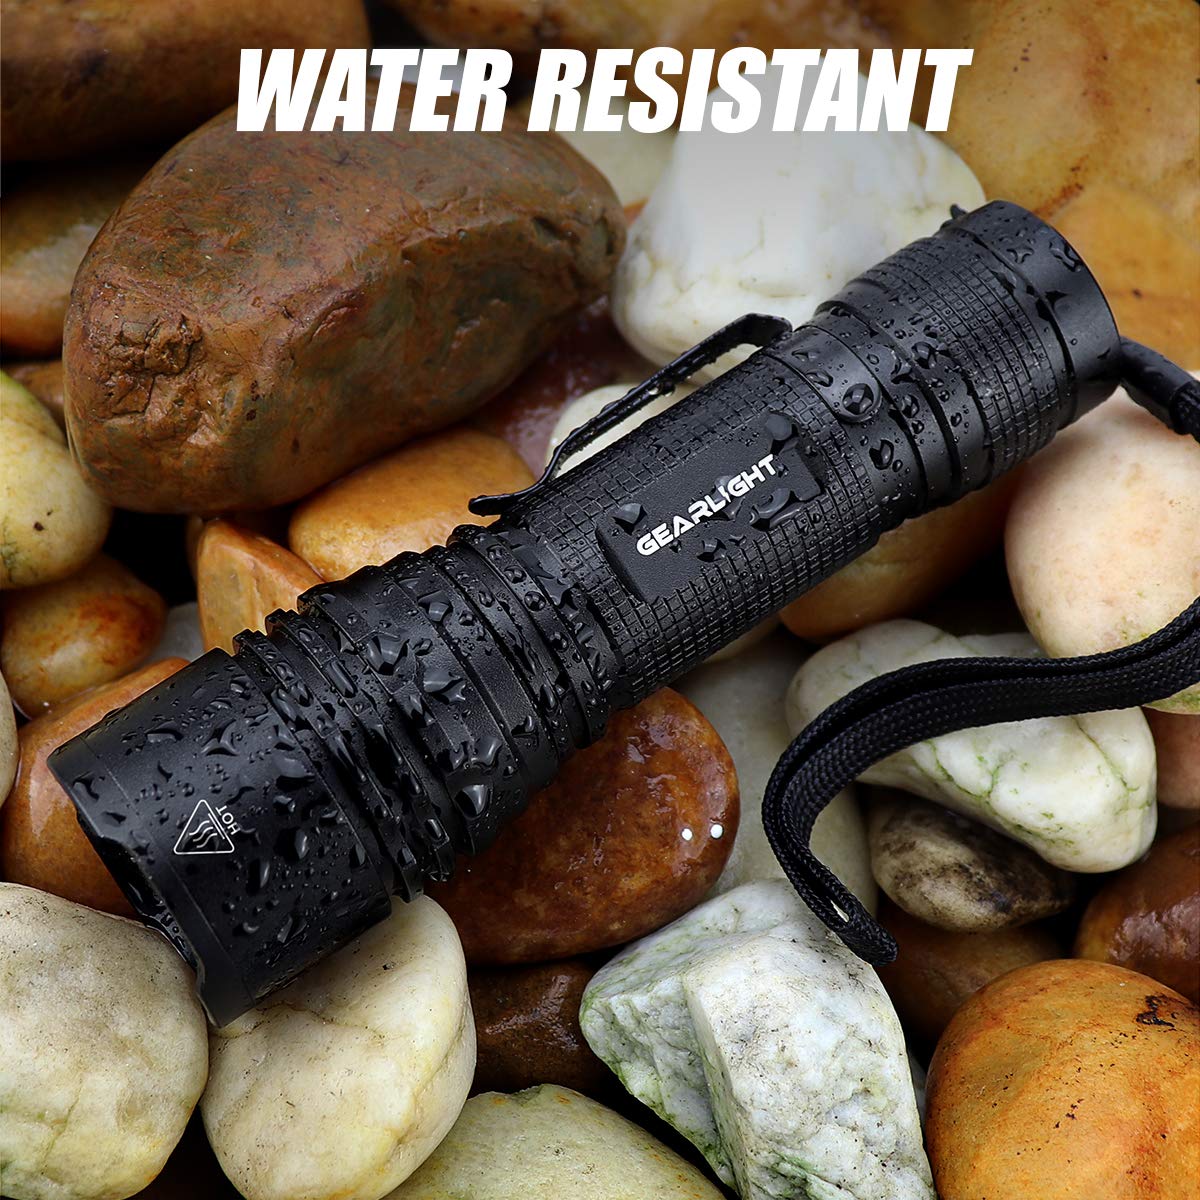 GearLight TAC LED Tactical Flashlight [2 PACK] - Single Mode, High Lumen, Zoomable, Water Resistant, Flash Light - Camping, Outdoor, Emergency, Everyday Flashlights with Clip - image 4 of 7